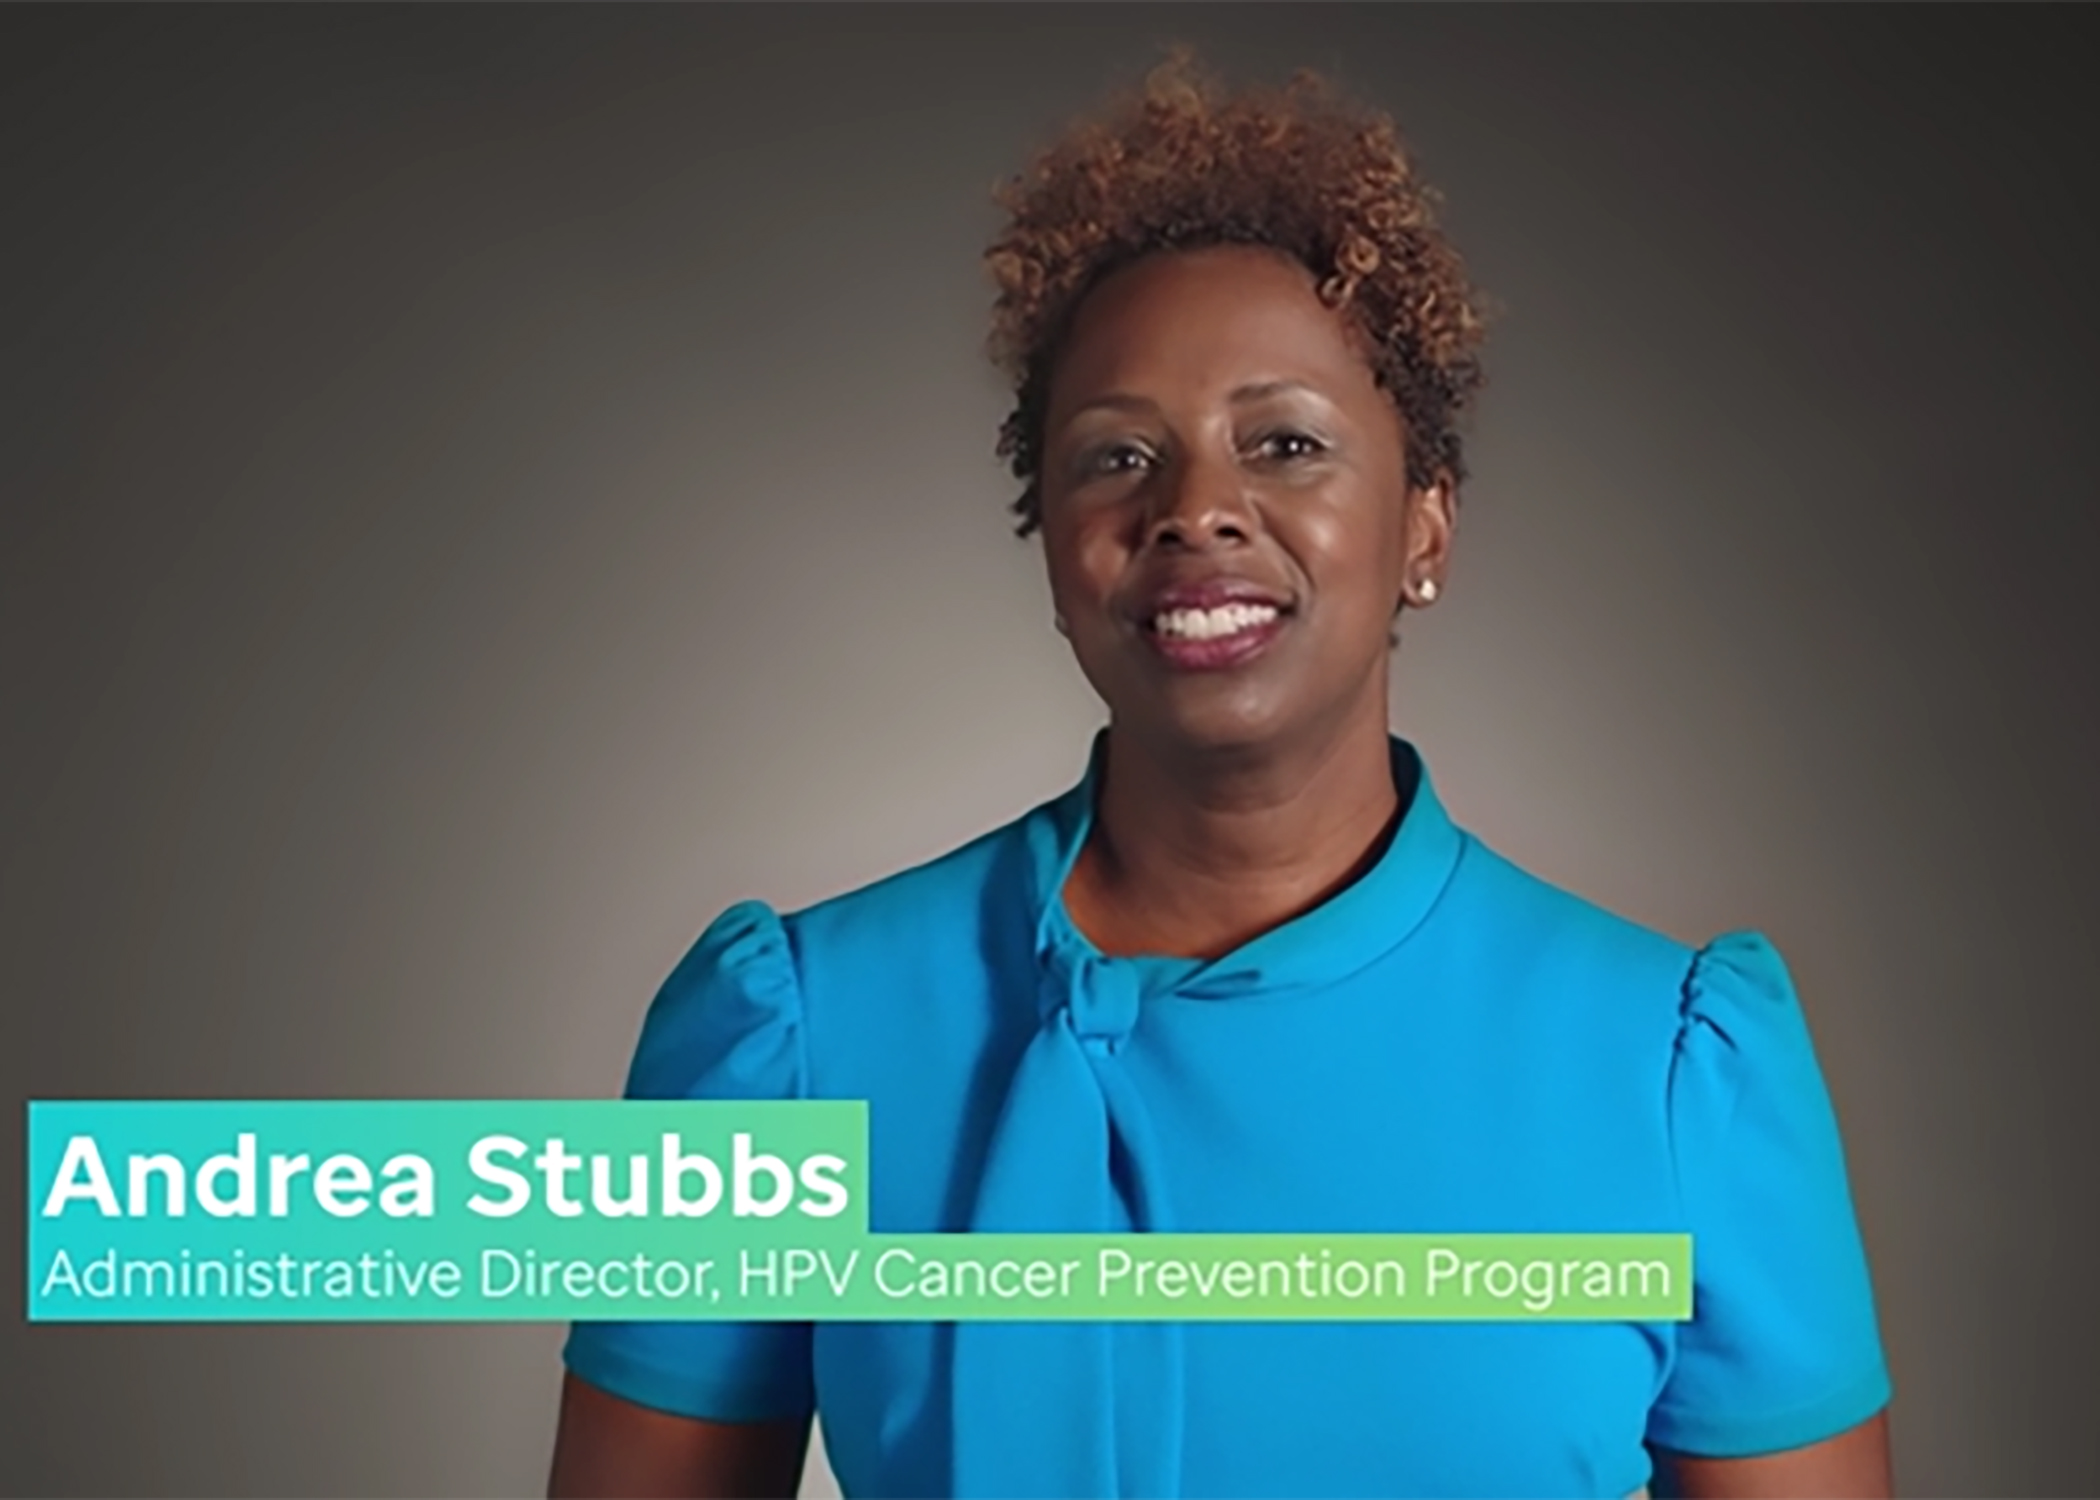 Andrea Stubbs, MPA, is administrative director of the St. Jude HPV Cancer Prevention Program. Here she discusses how St. Jude hopes to improve community health by promoting the safety and efficacy of the HPV vaccine.